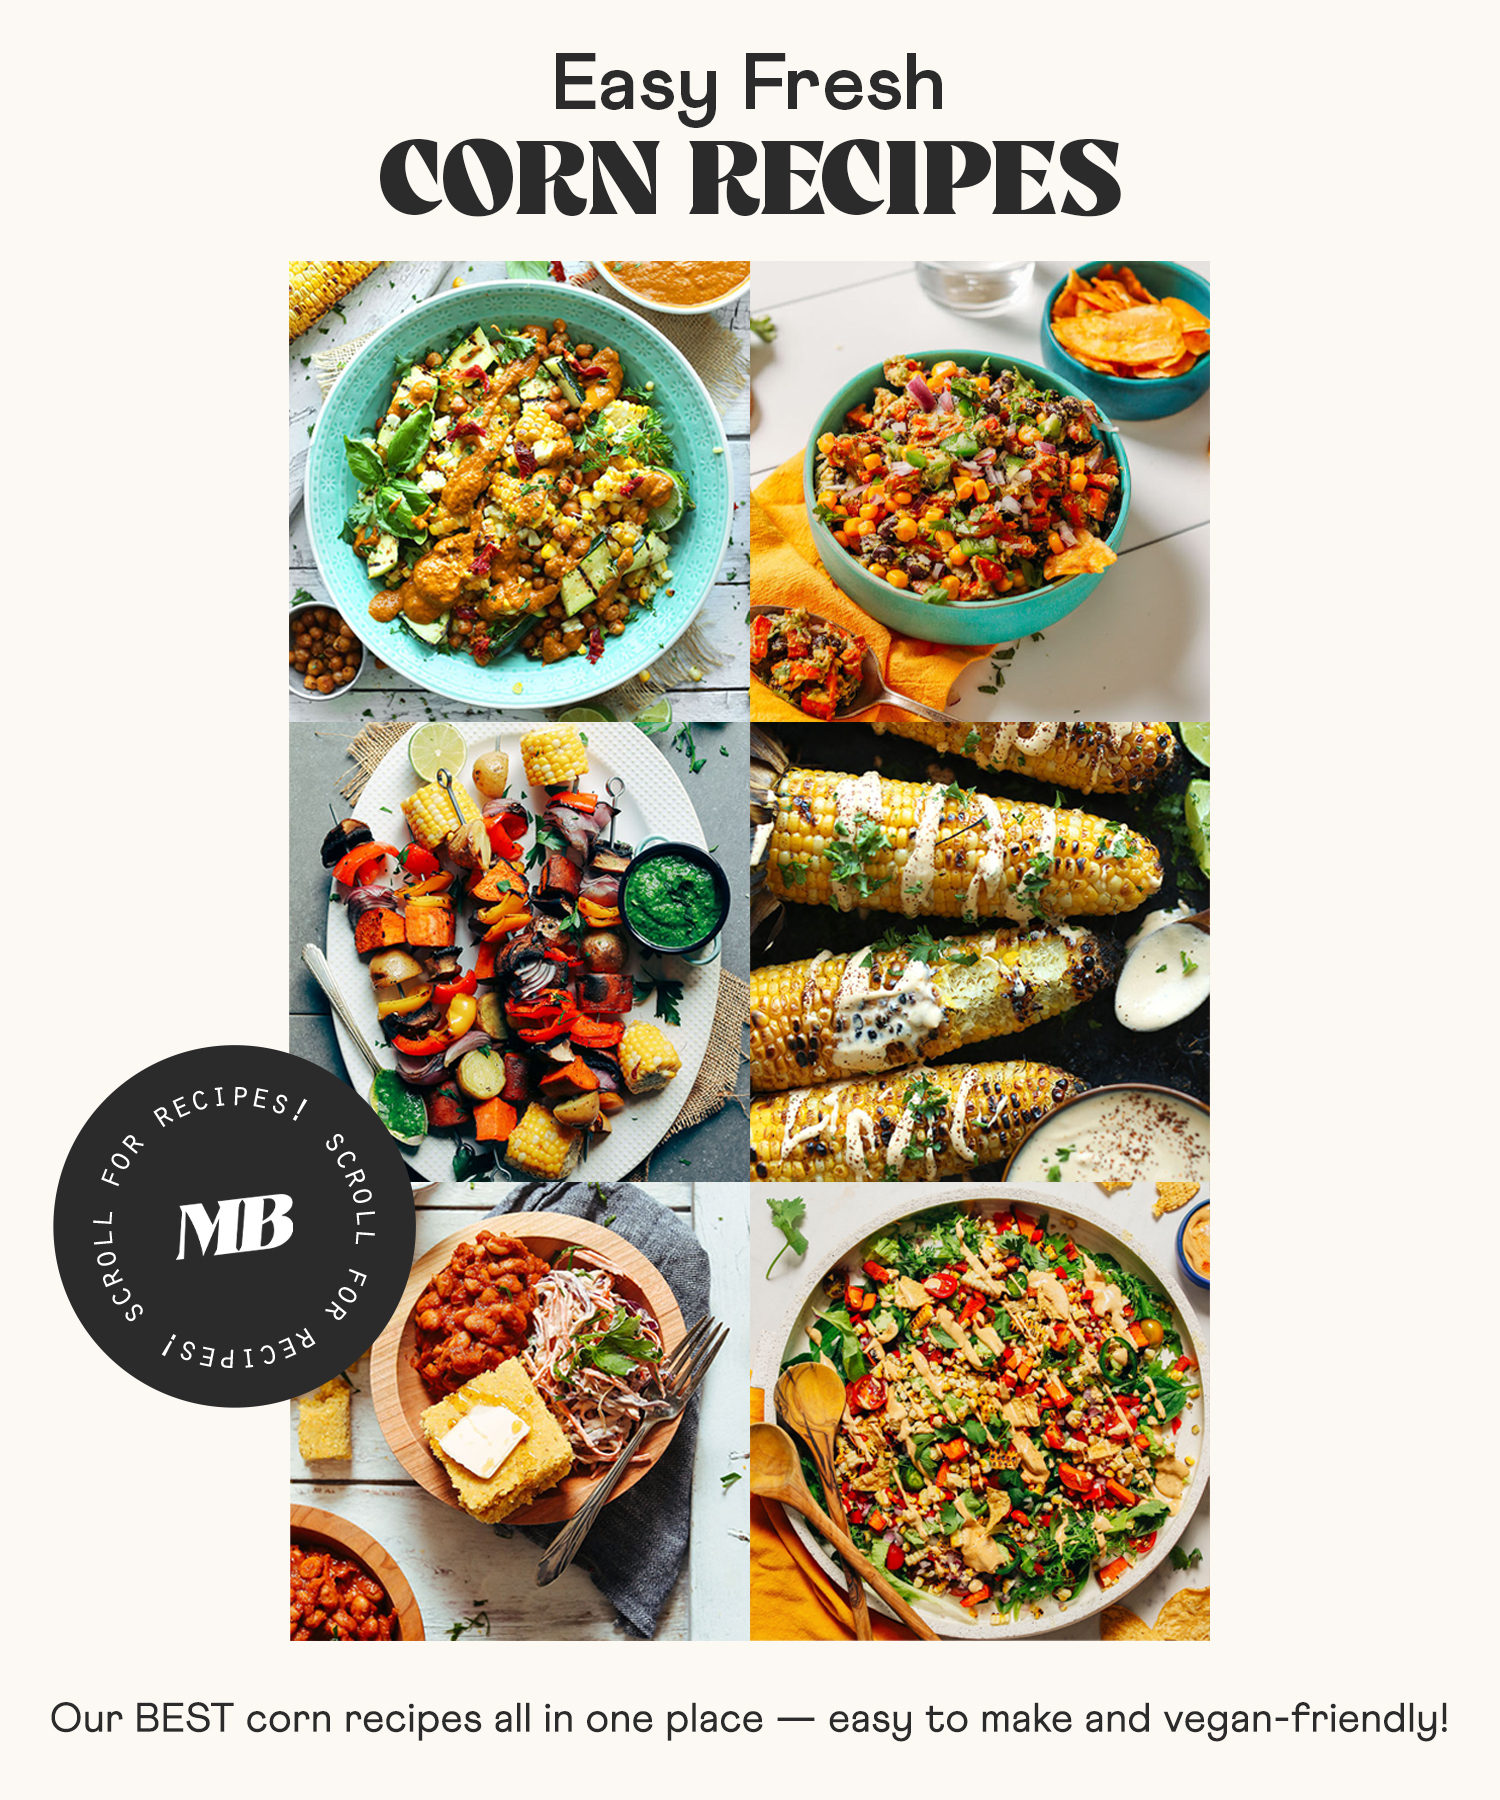 Assortment of easy fresh corn recipes including salads, dips, grilling favorites, and more